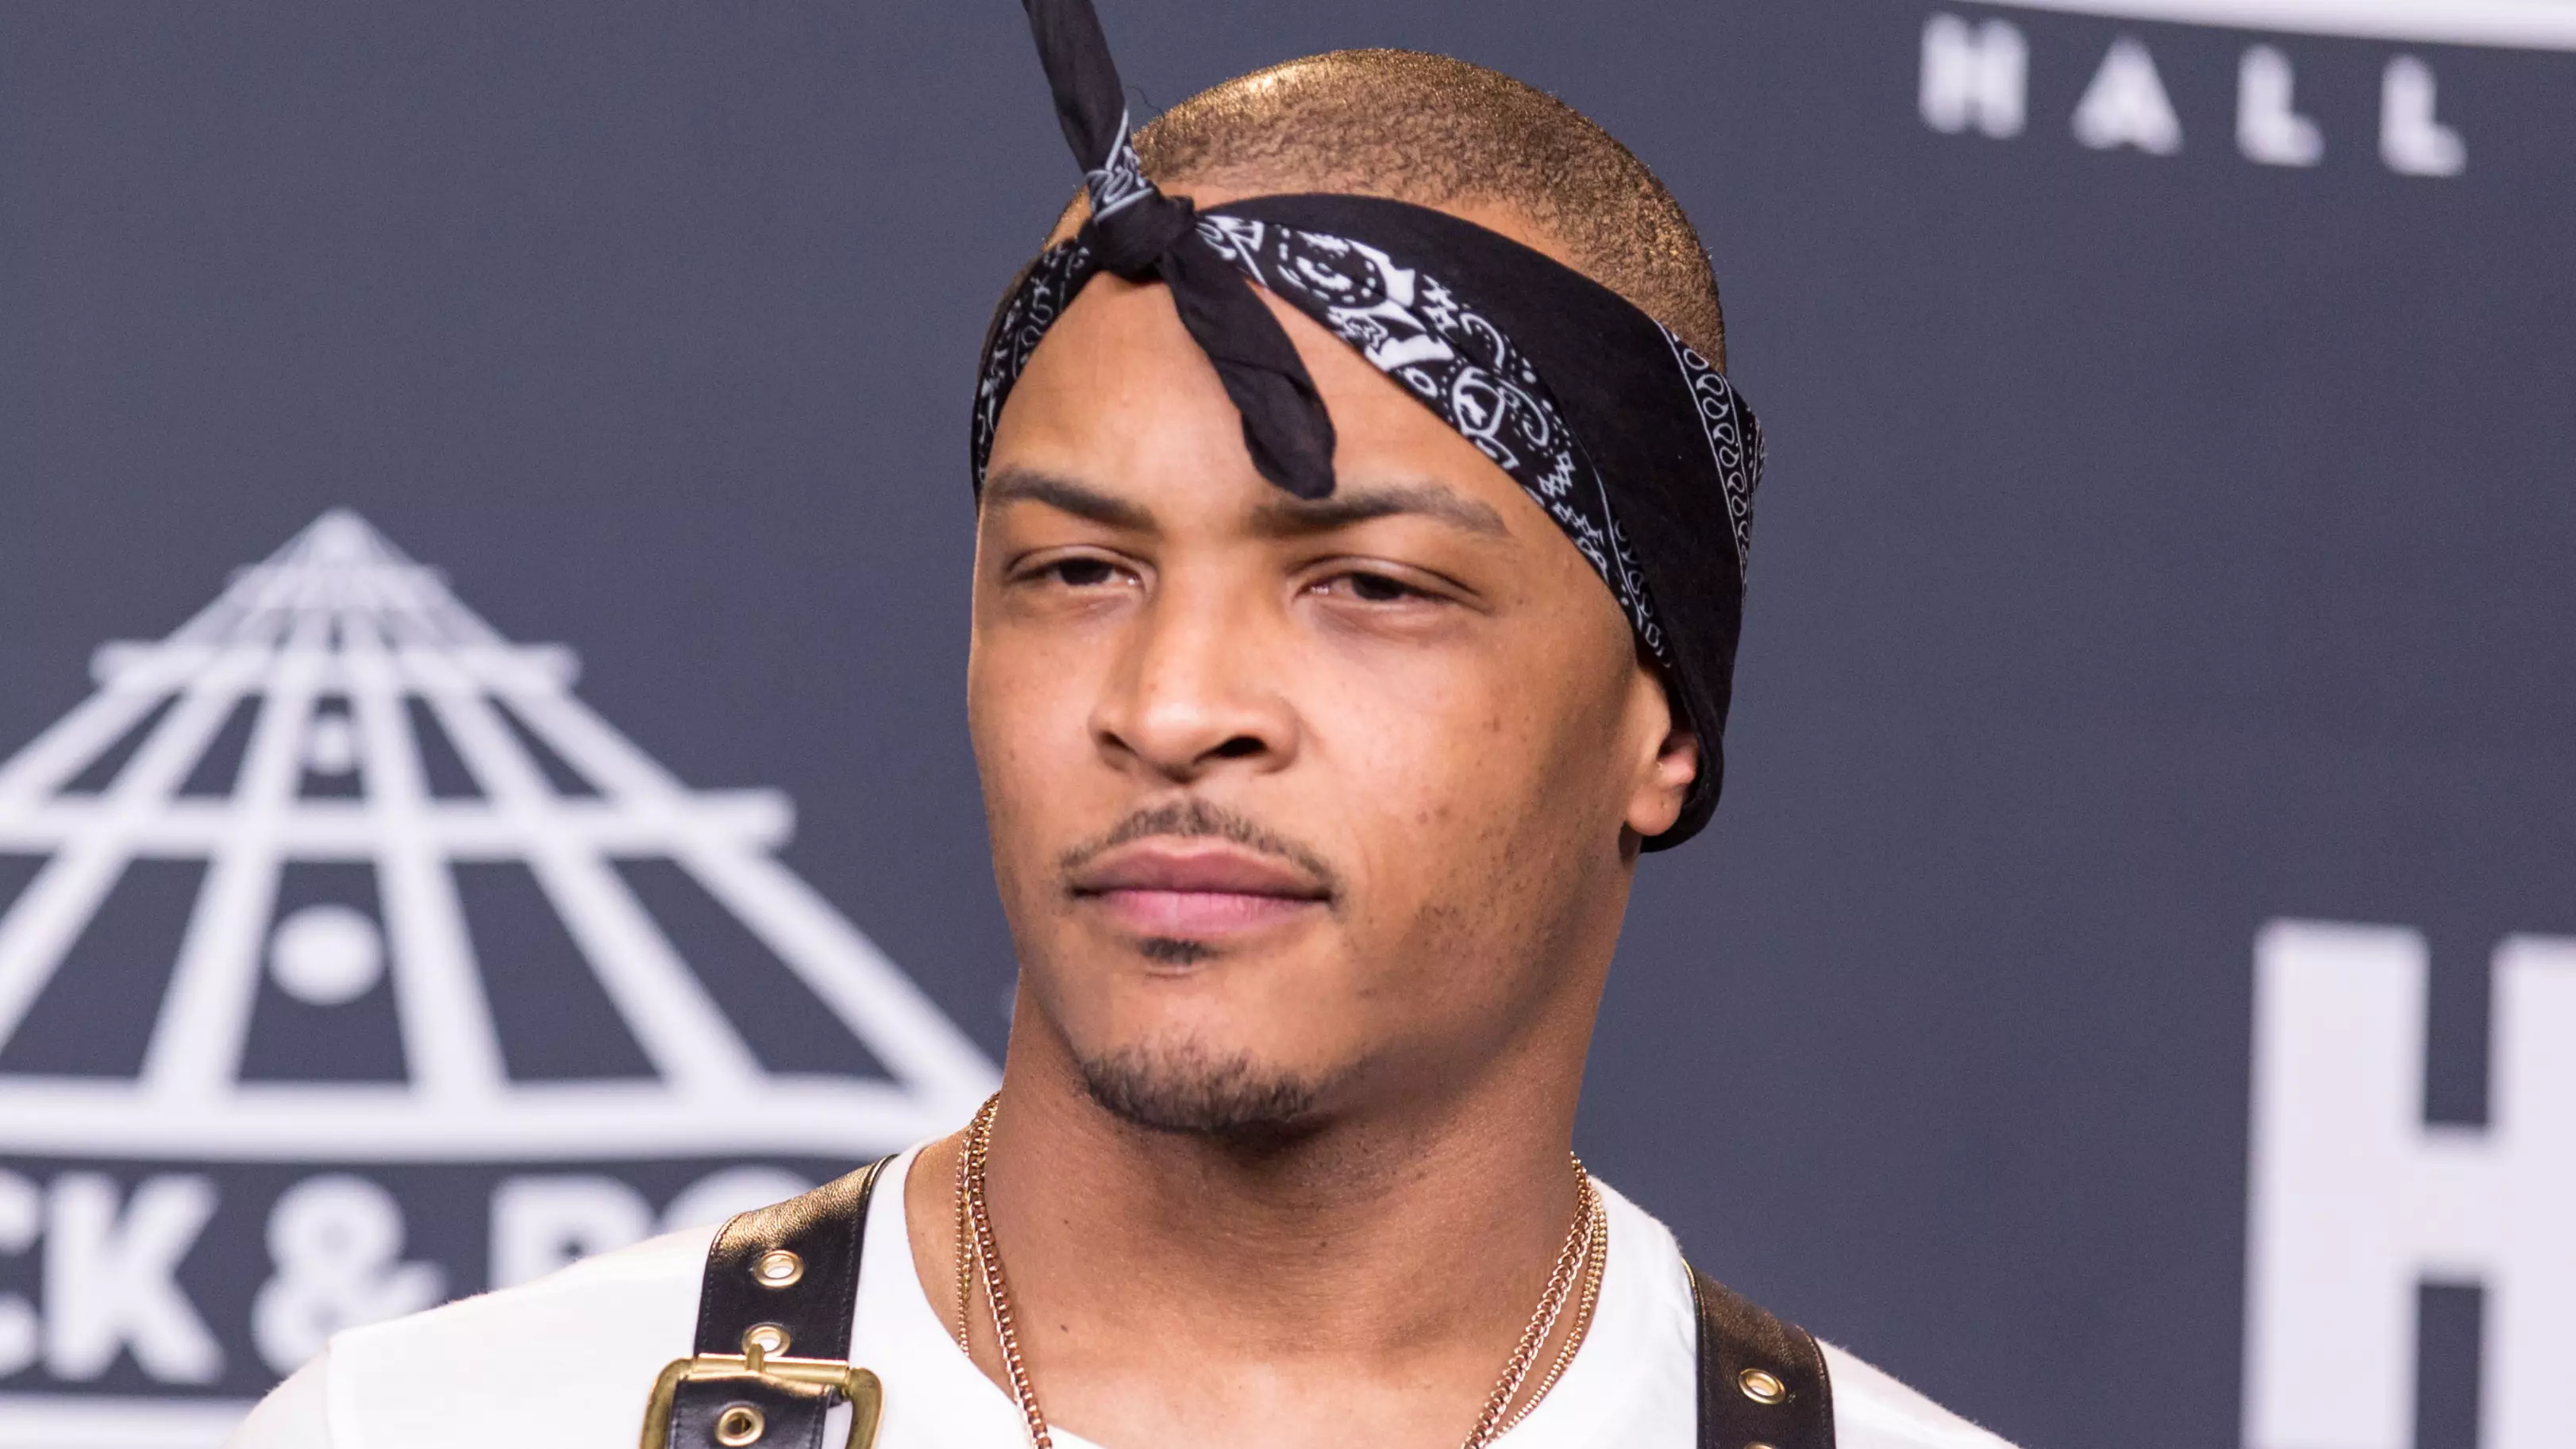 T.I. Reckons The Gay Community Is Bullying Rappers Like DaBaby